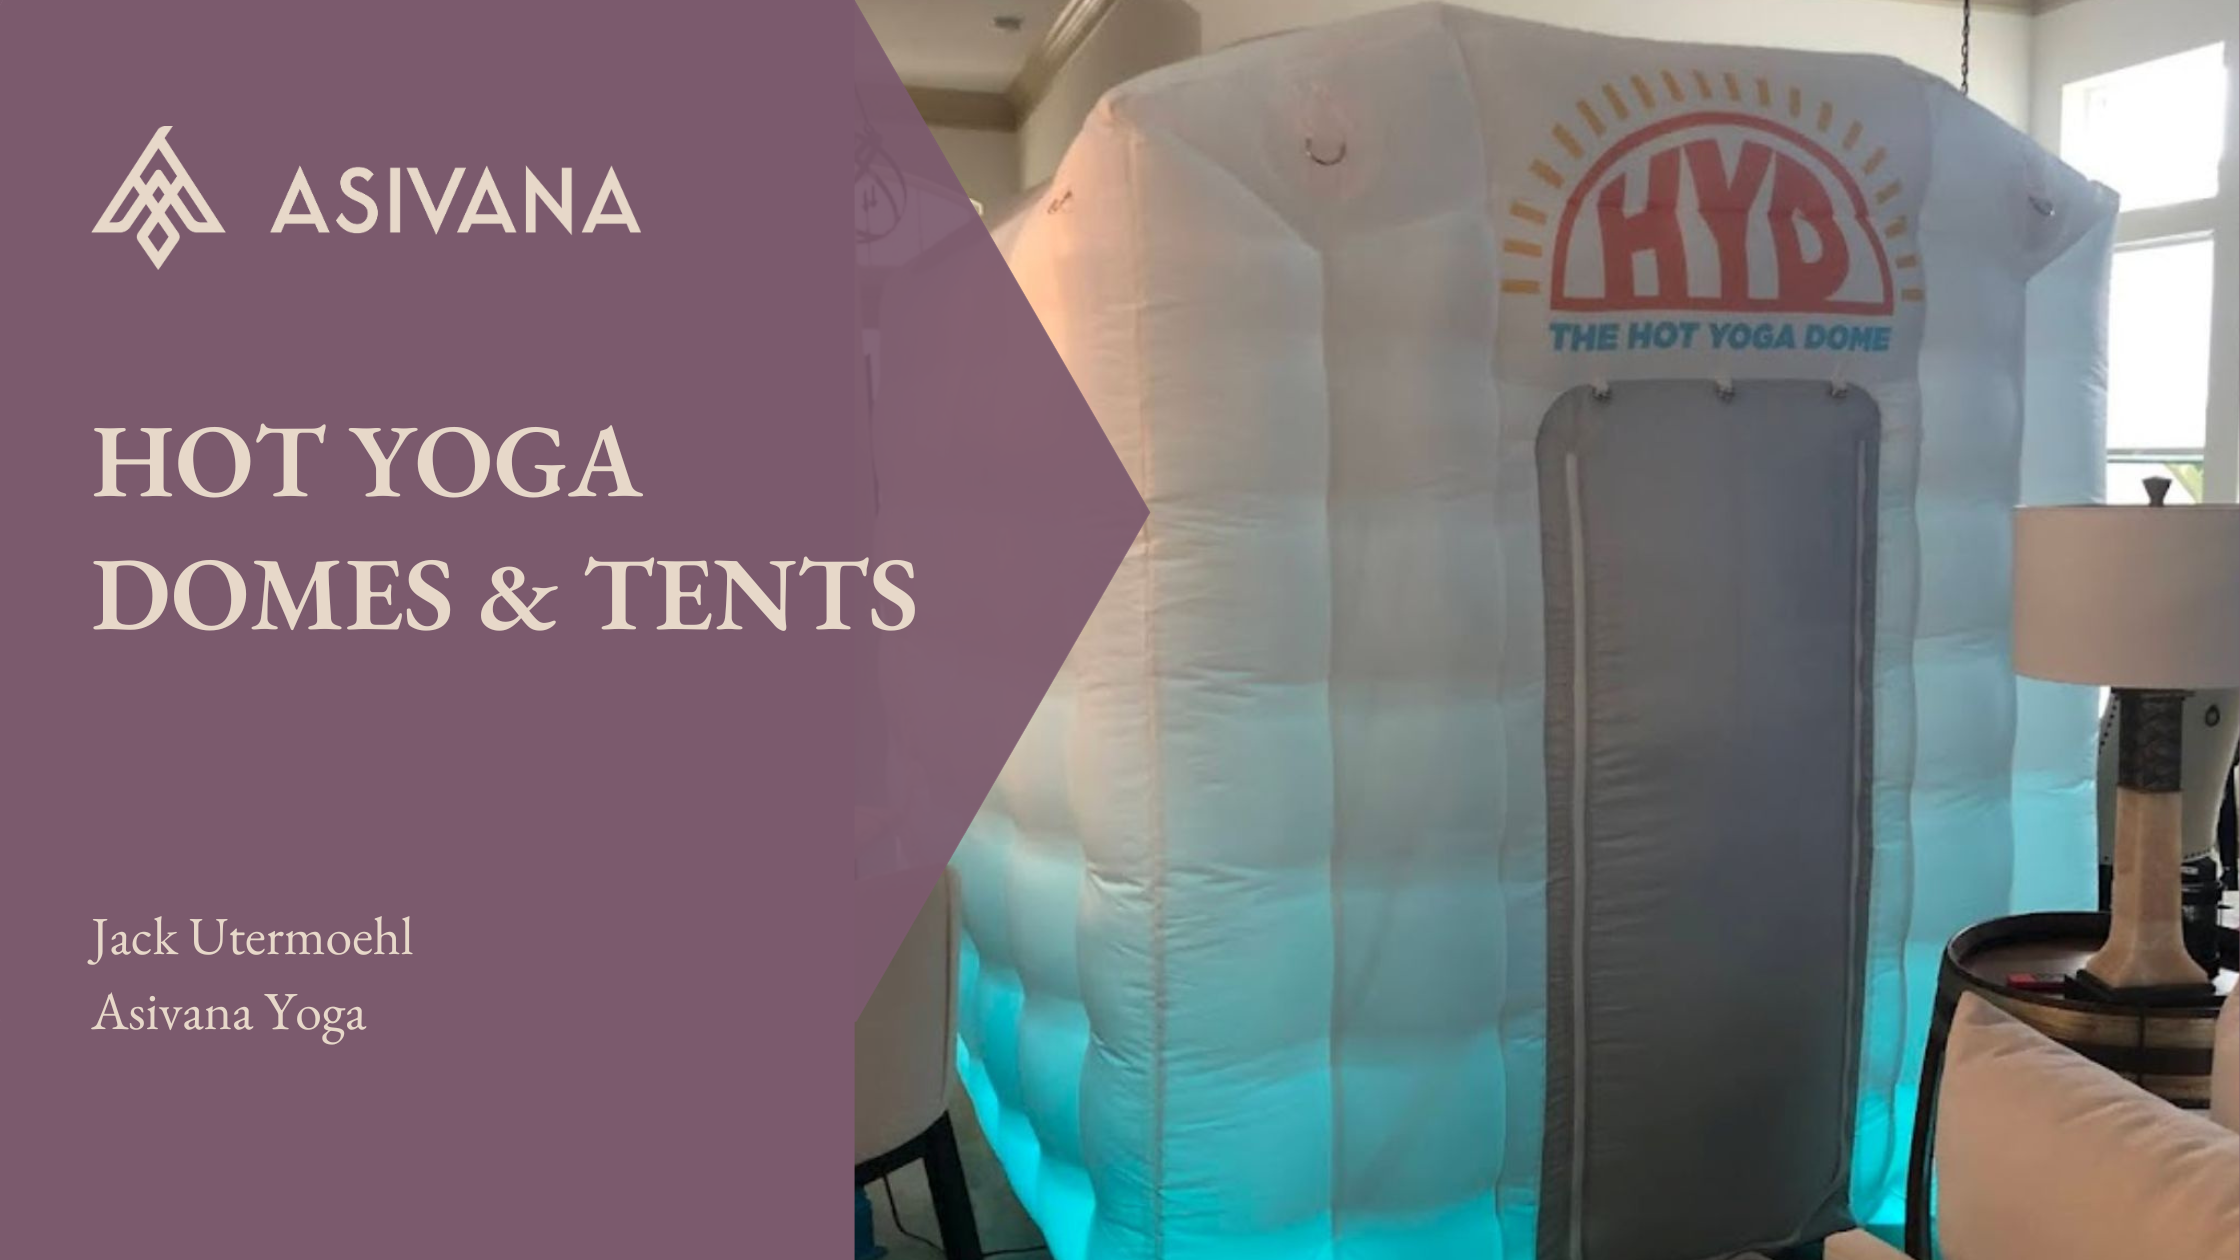 The Best Hot Yoga Domes and Tents – Asivana Yoga